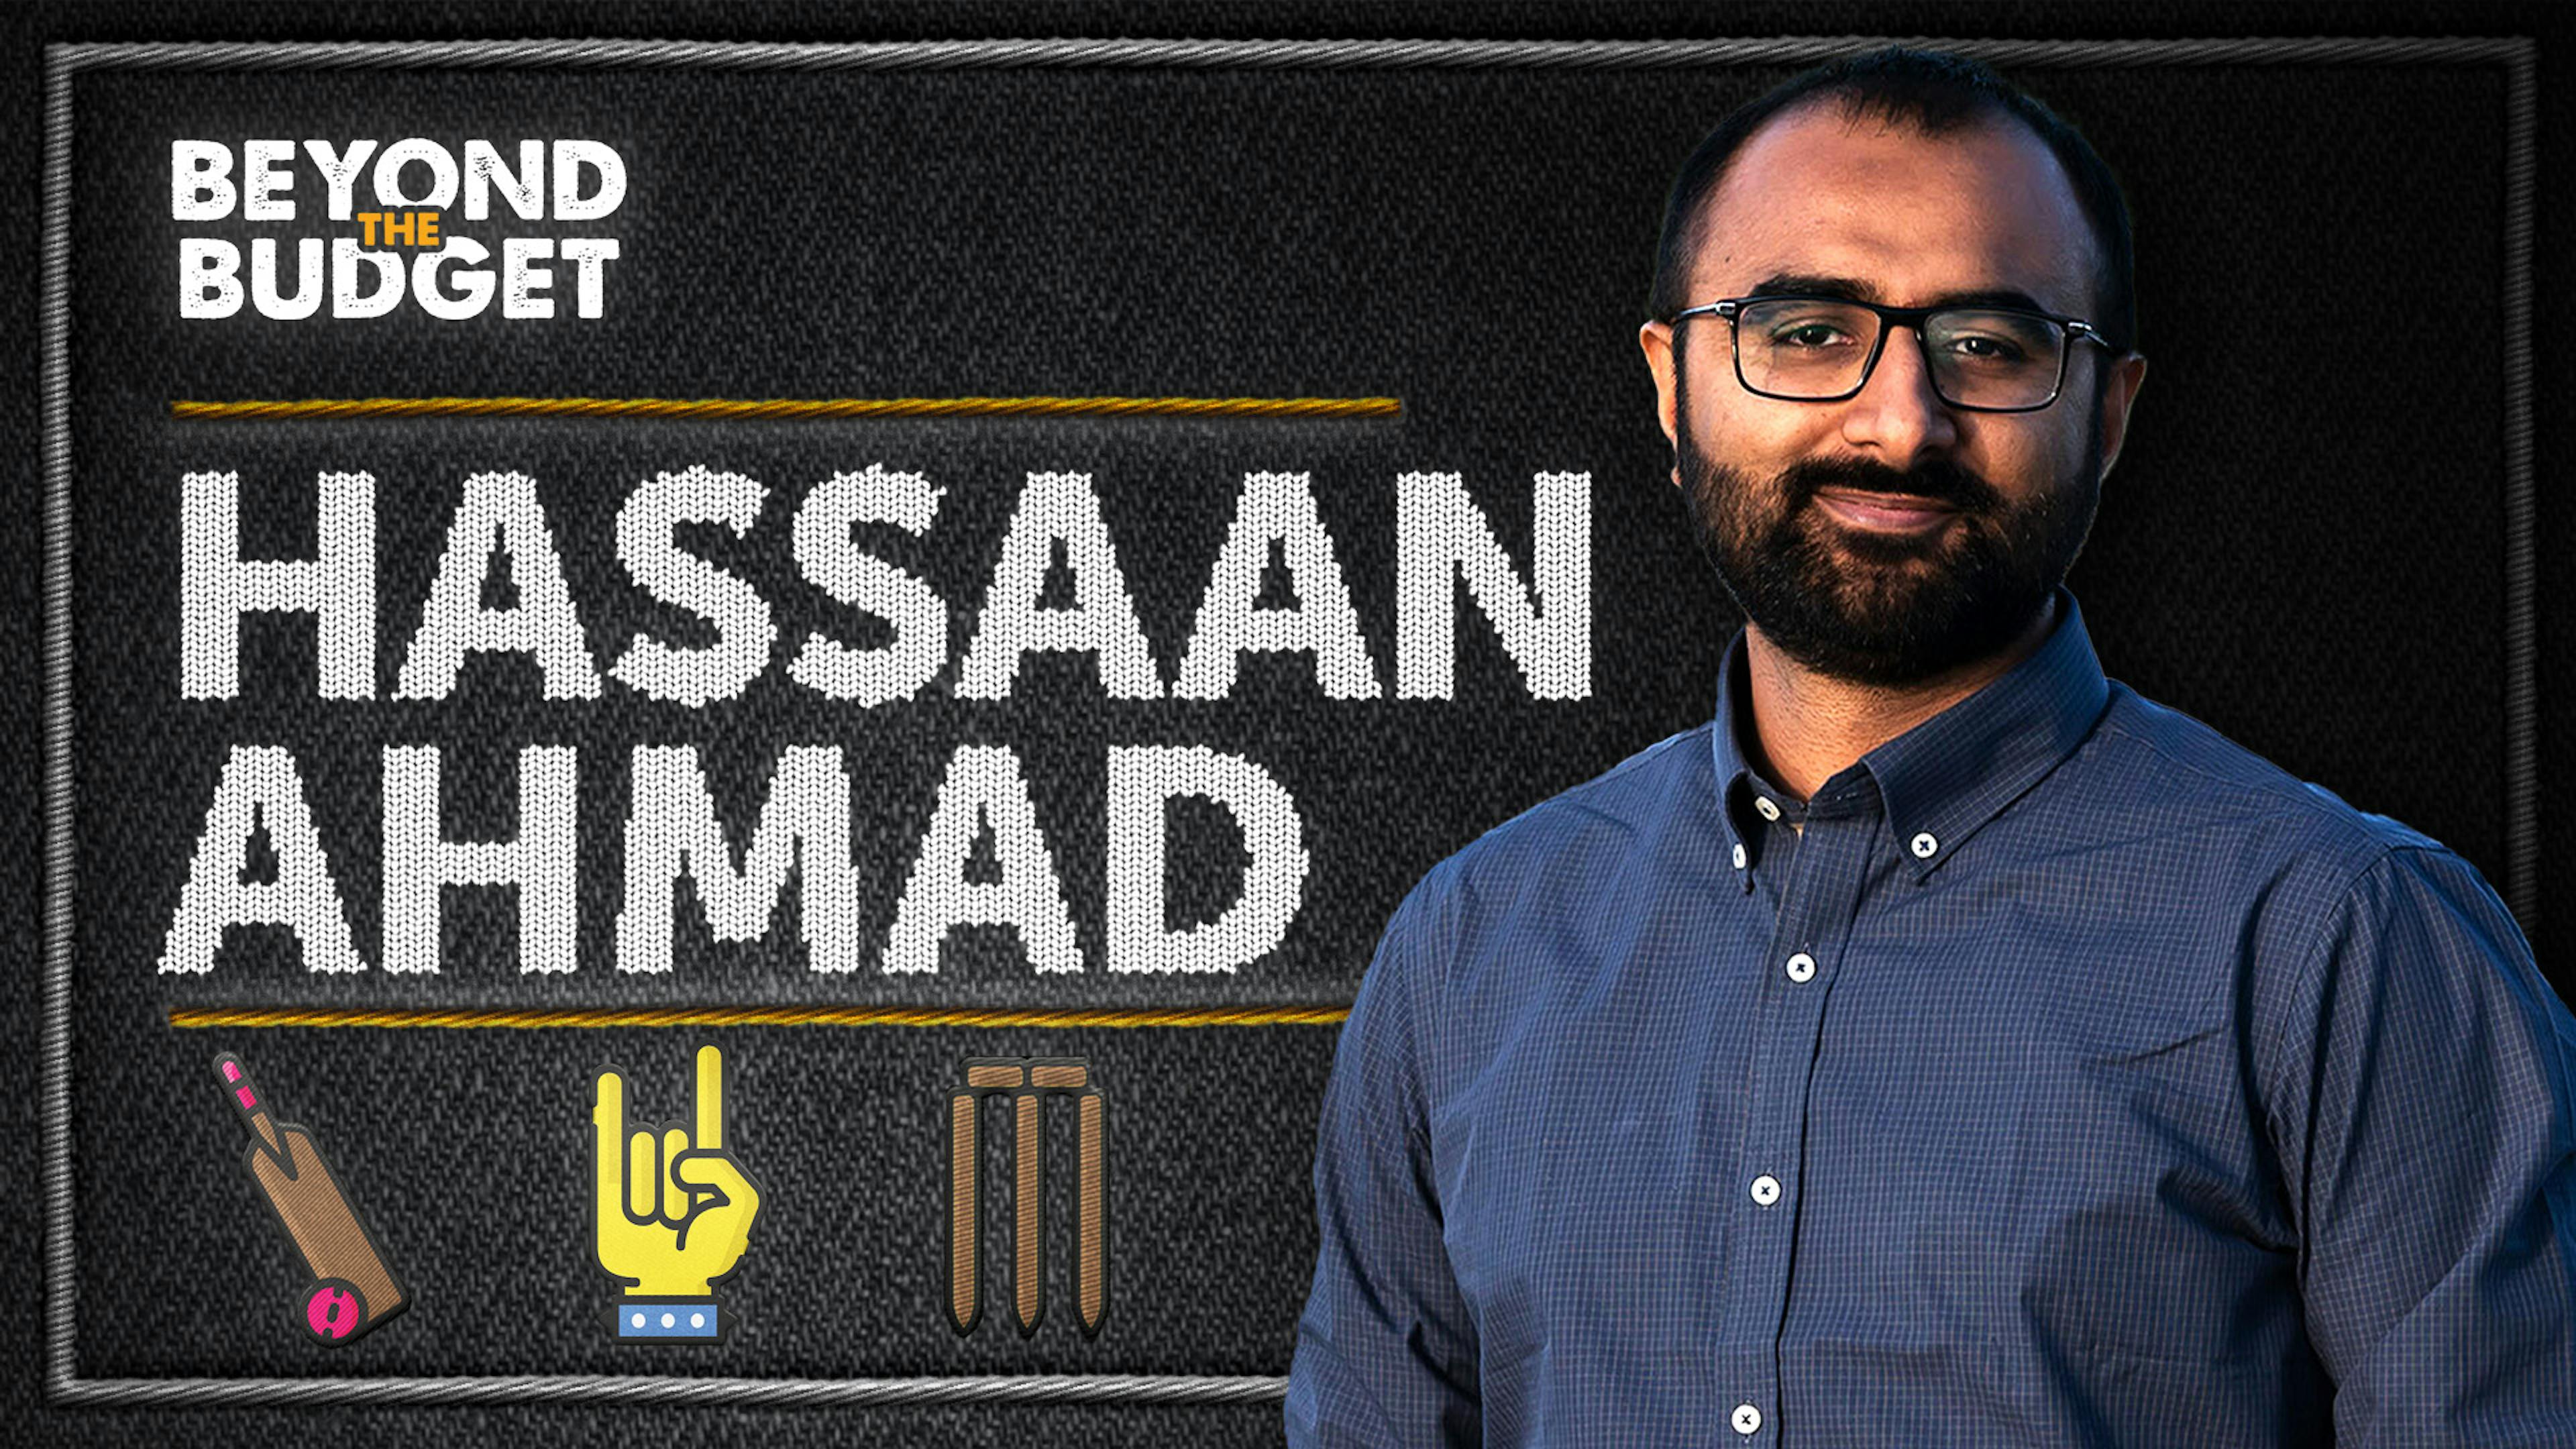 Beyond the Budget thumbnail featuring Hassaan Ahmad